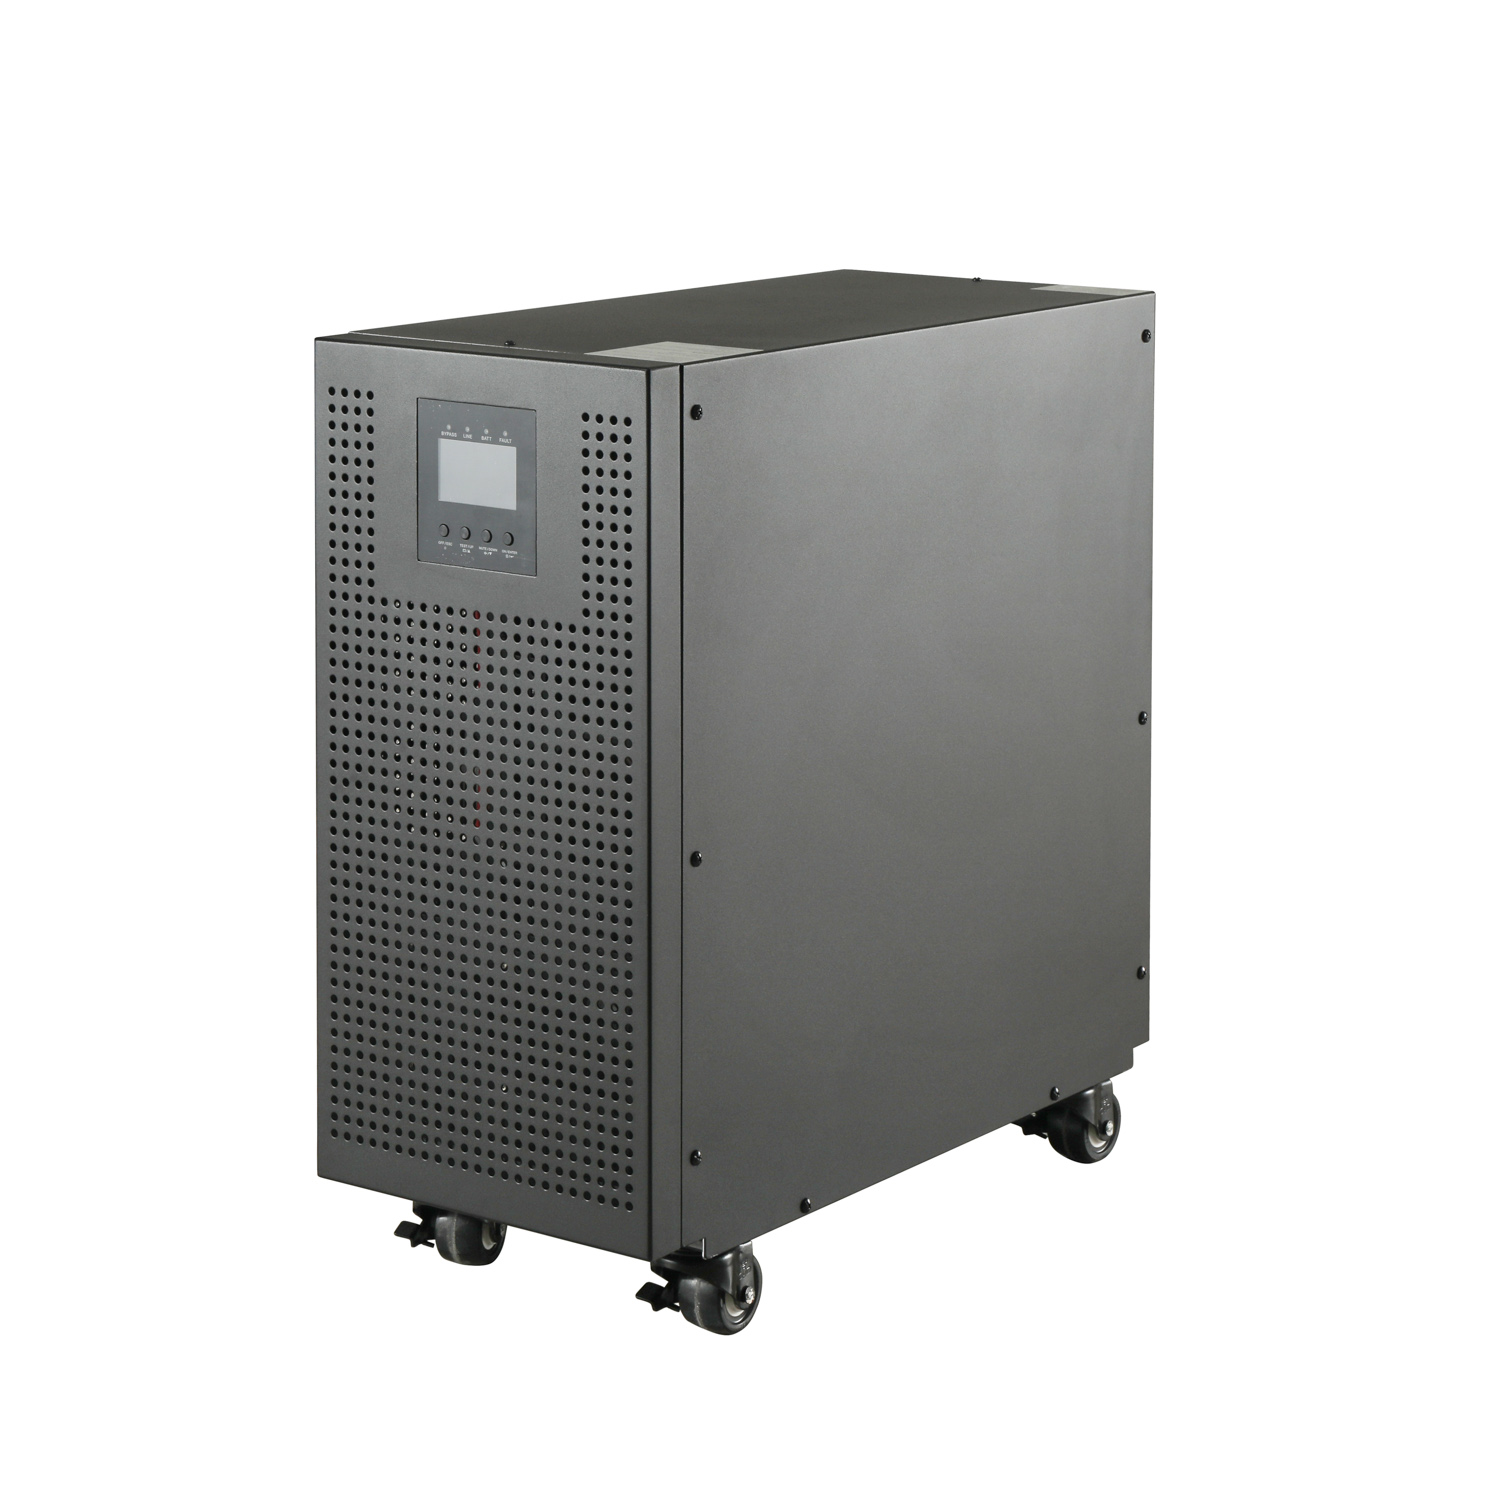 Online UPS: A new option to ensure power stability